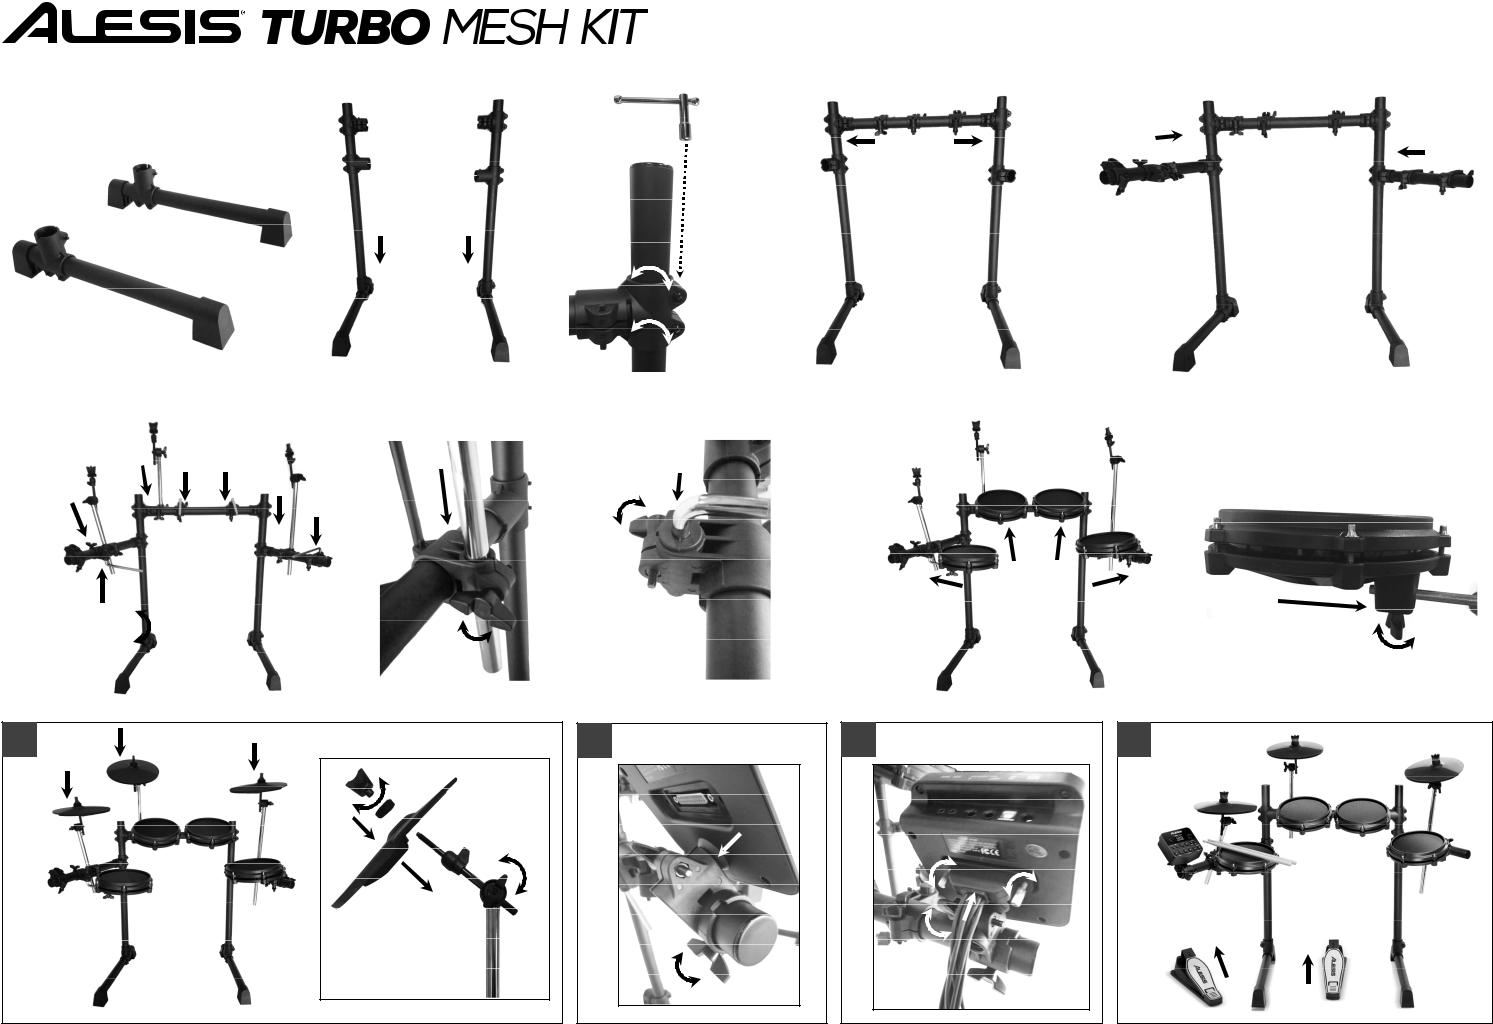 Alesis Turbo Mesh Kit assembly guide